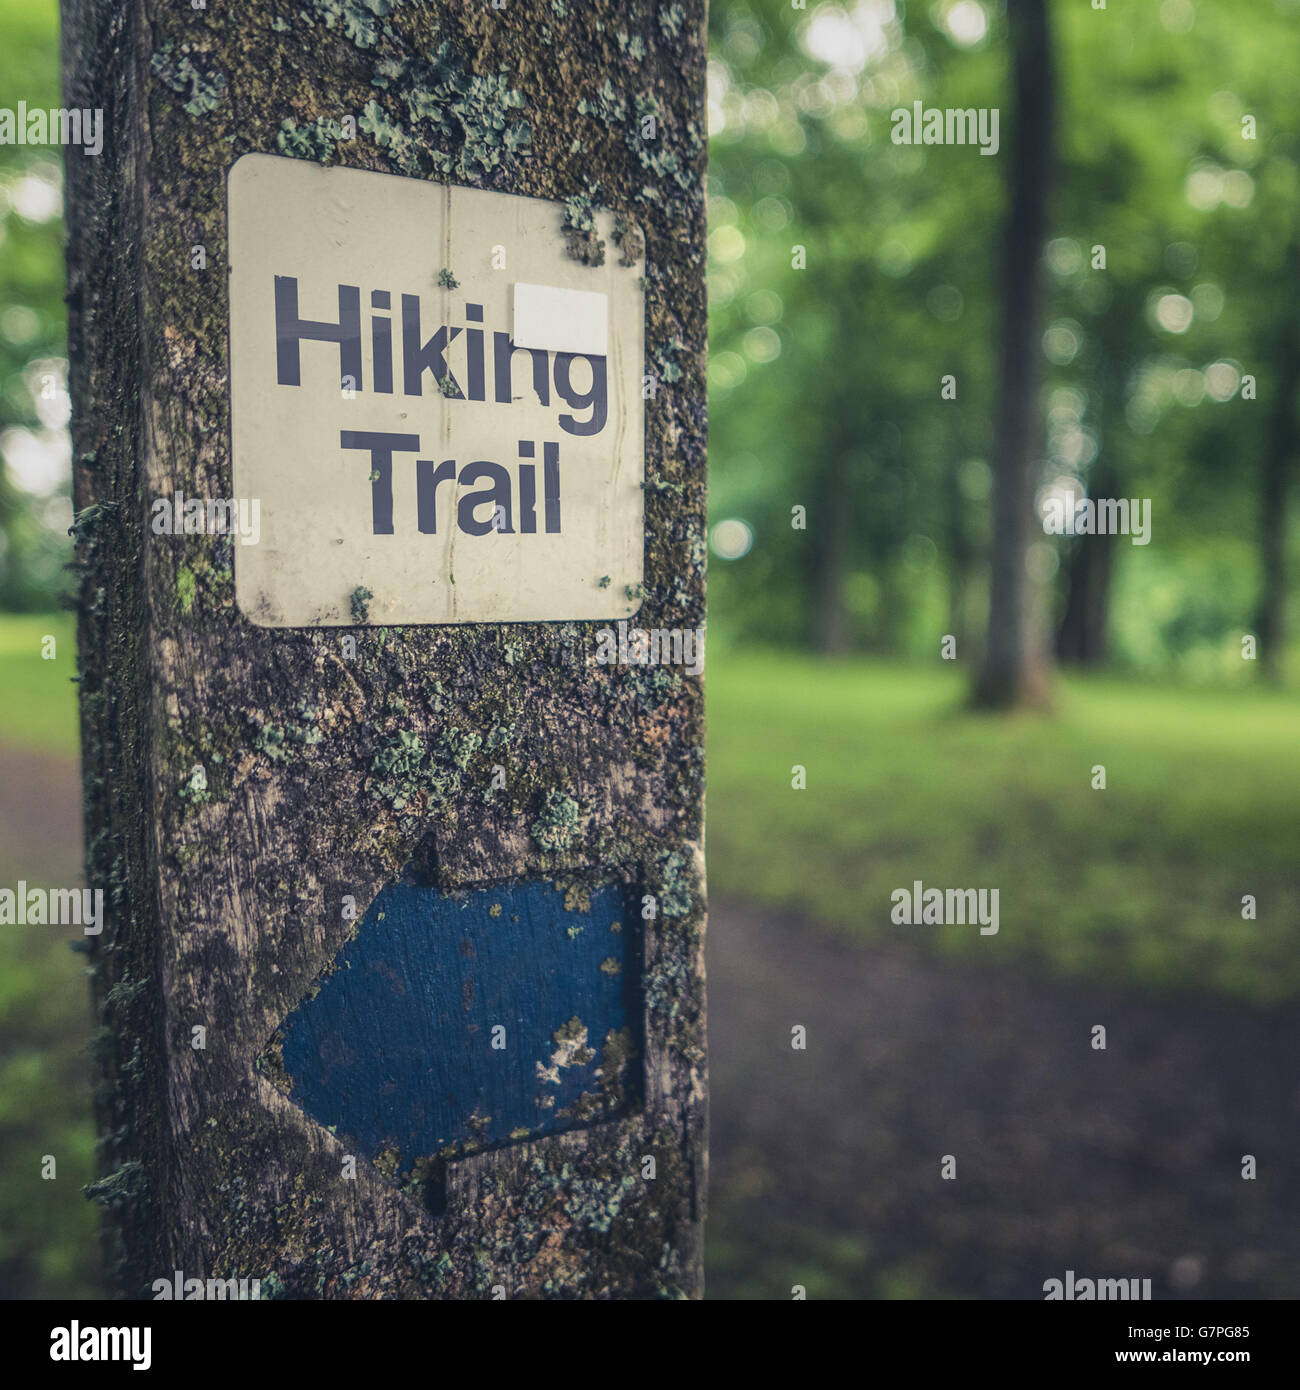 Hiking Trail Sign On A Wooden Post In A Forest Stock Photo